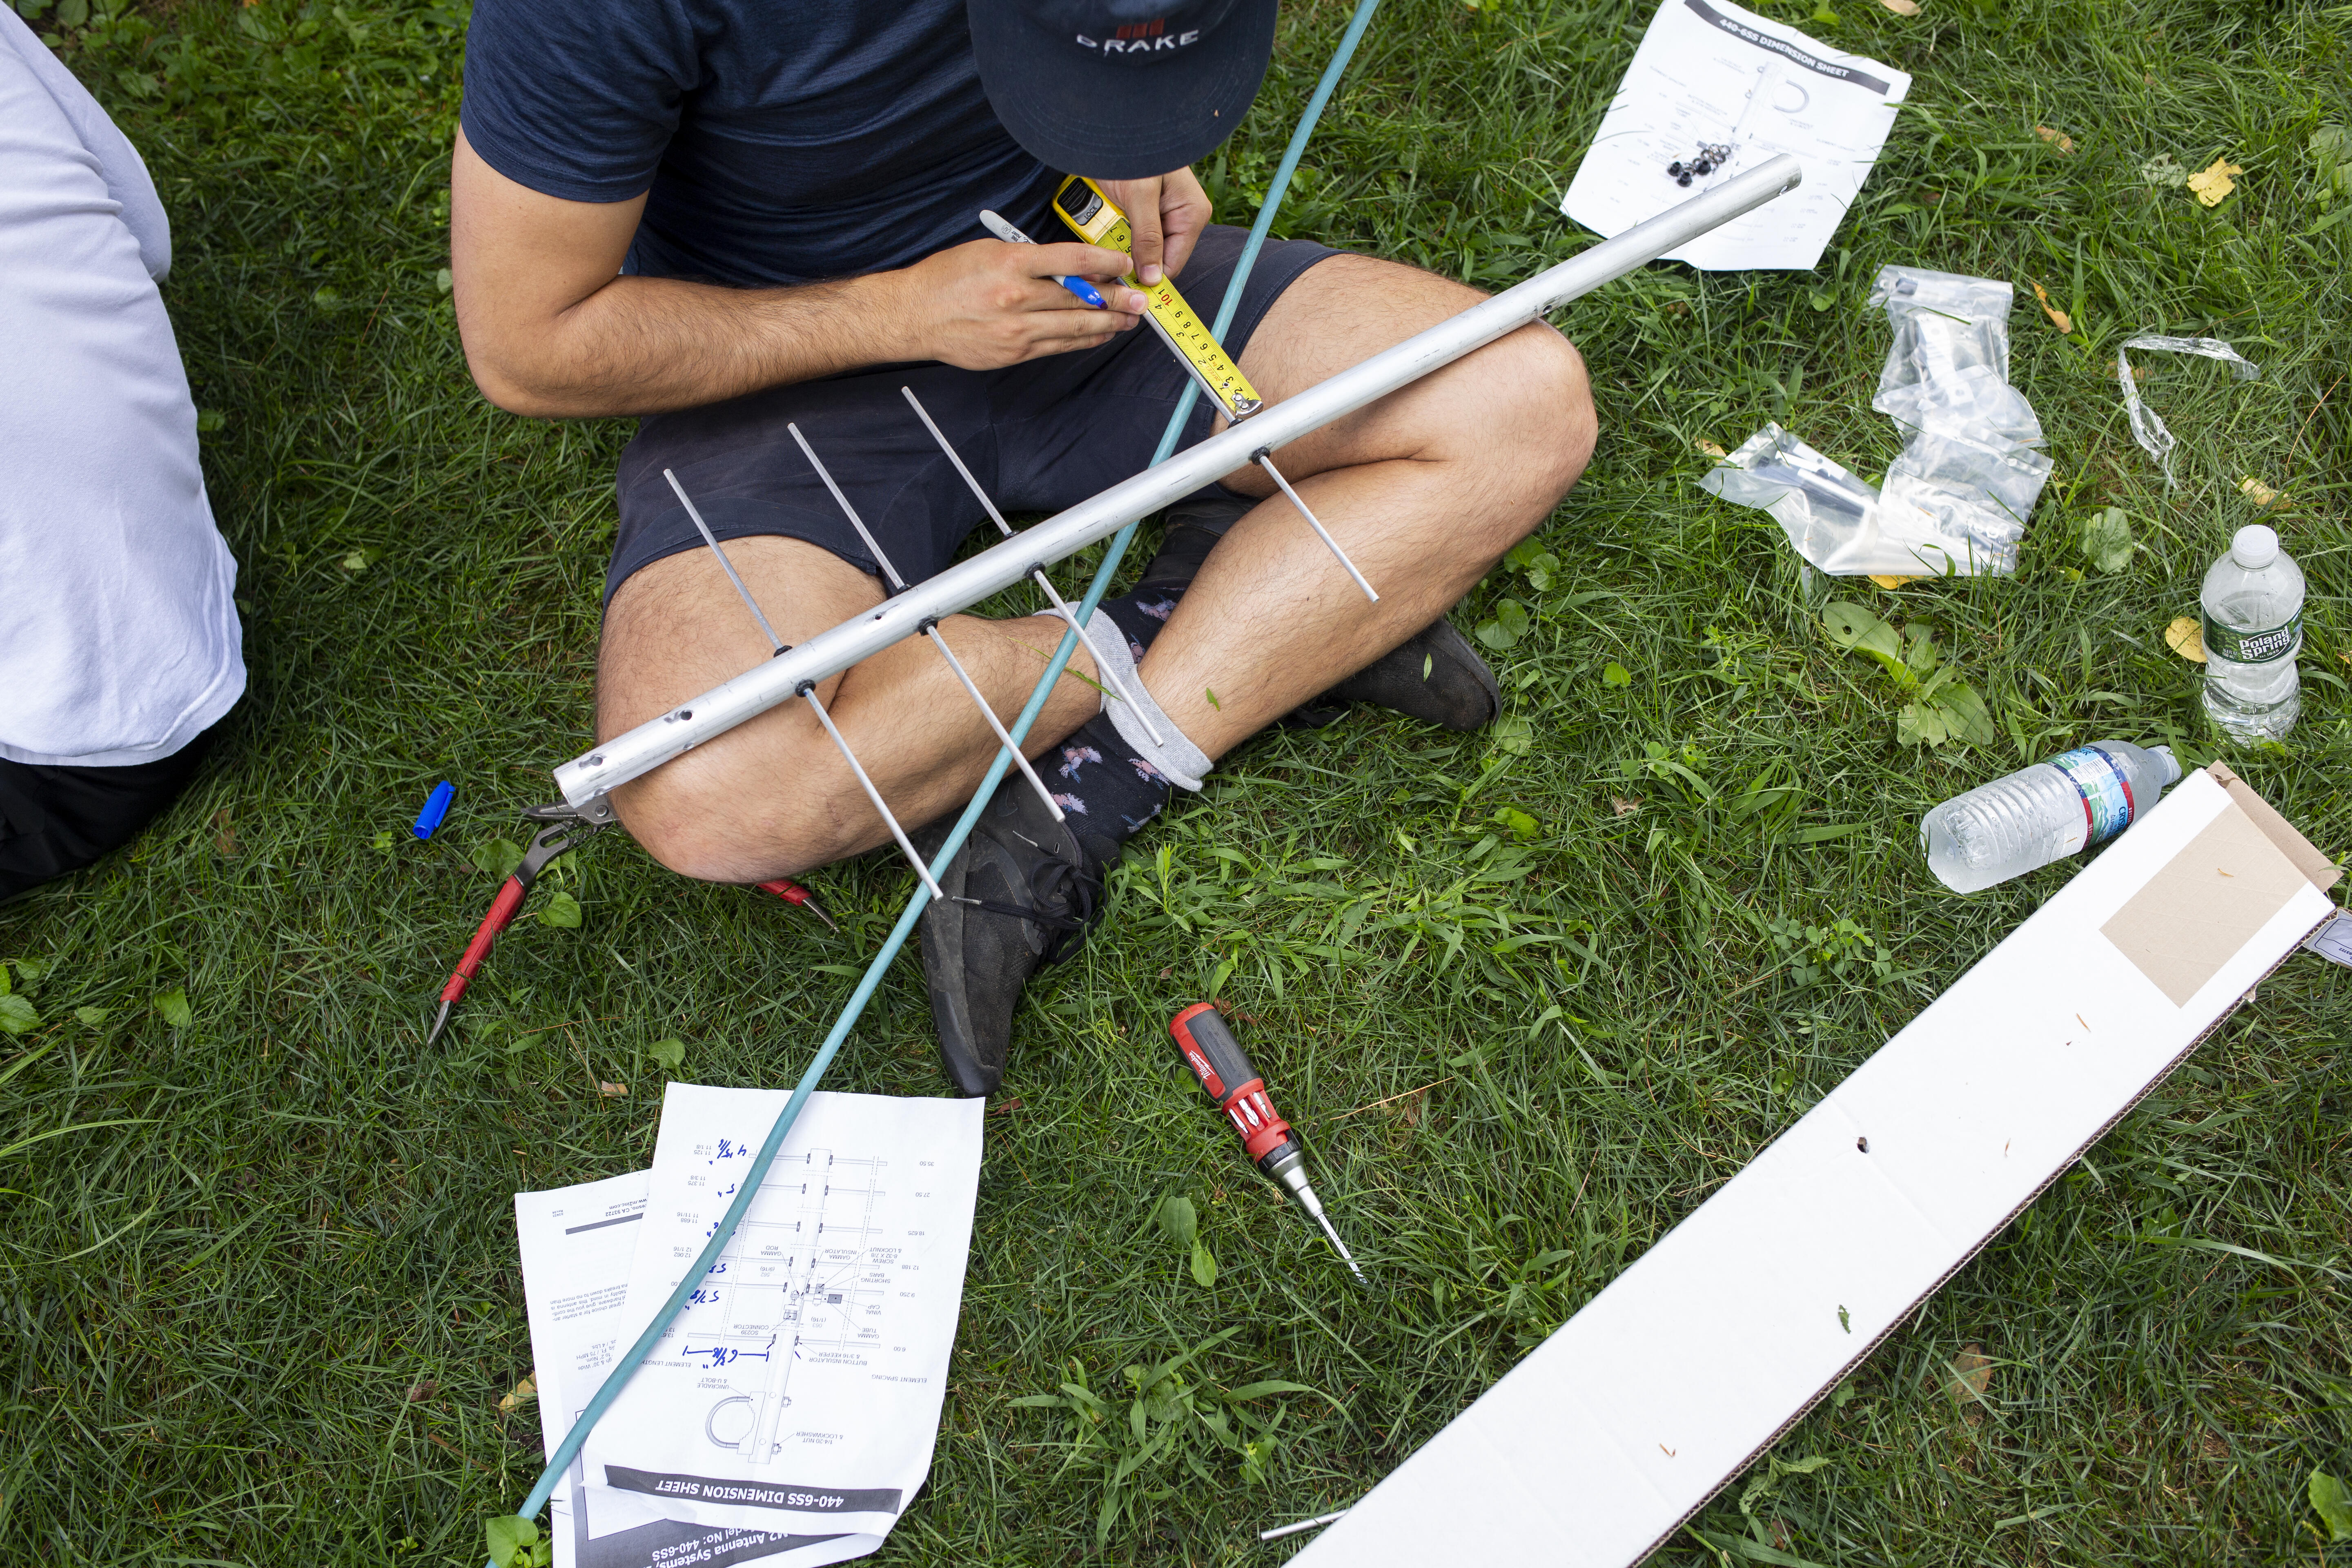 A man sits on the ground, measuring antennae with a measuring tape.